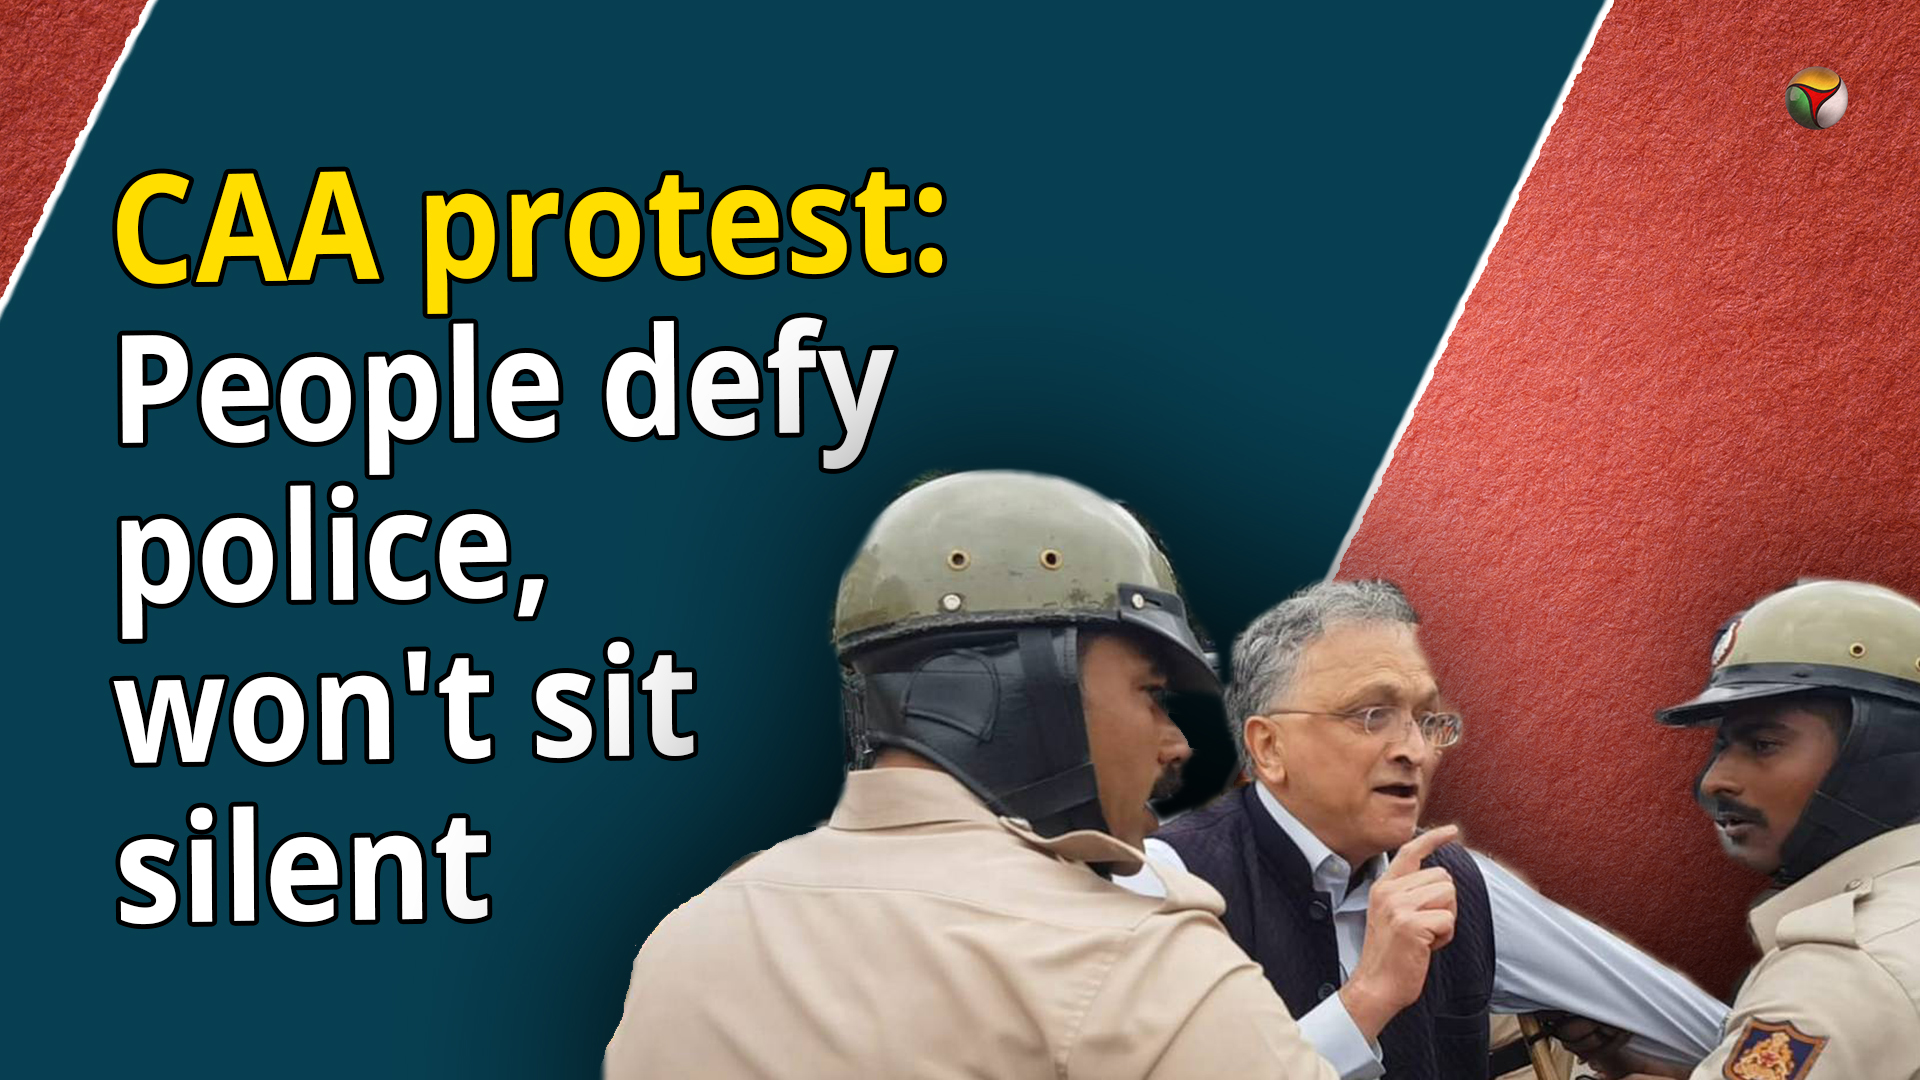 CAA protest: People defy police, wont sit silent